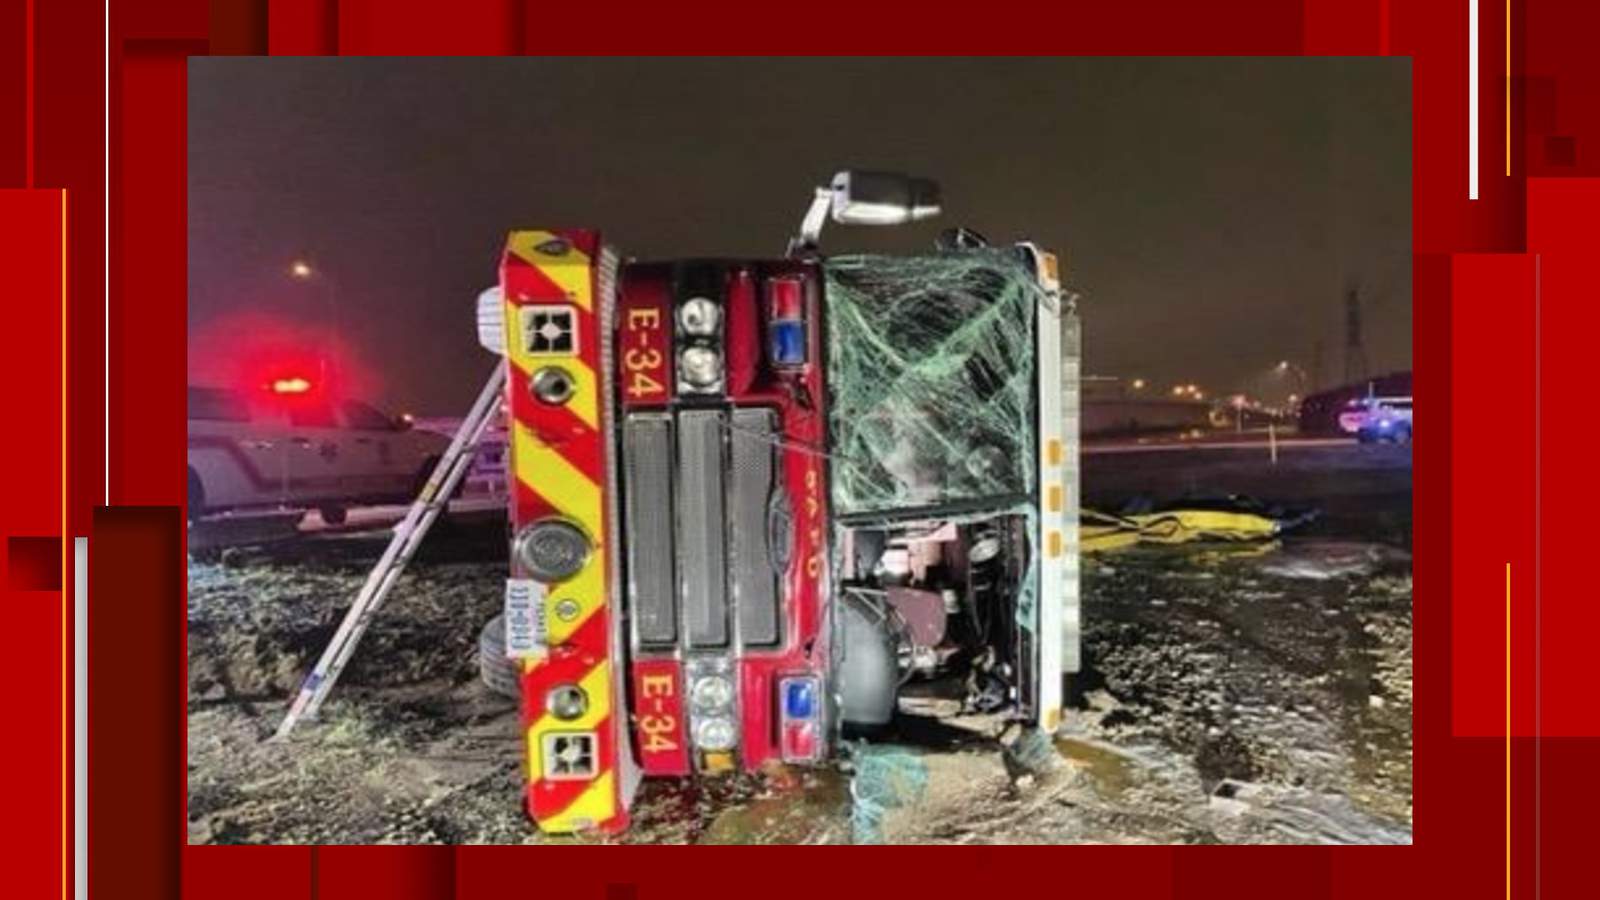 ‘This storm is serious,’: SAFD warns of weather dangers after fire truck overturns on icy roadway